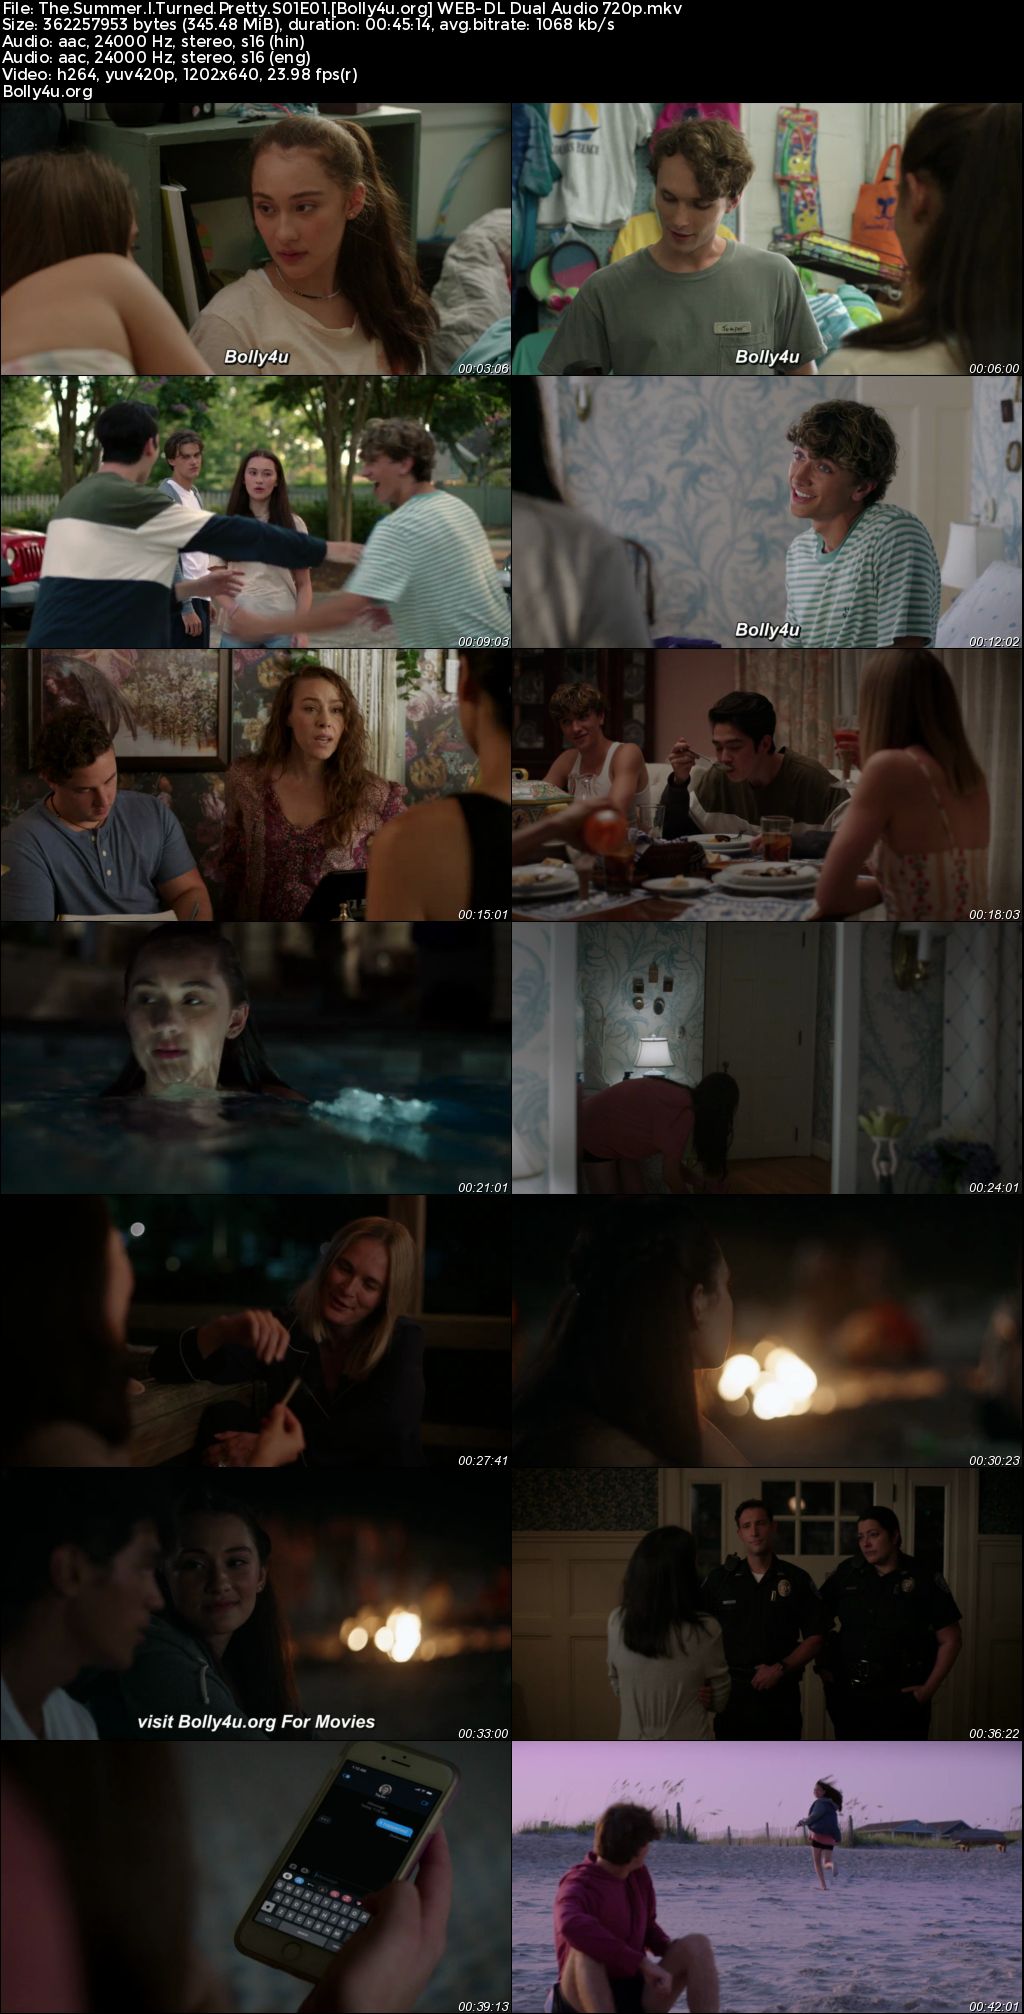 The Summer I Turned Pretty 2022 WEB-DL Hindi Dual Audio ORG S01 Complete Download 720p 480p